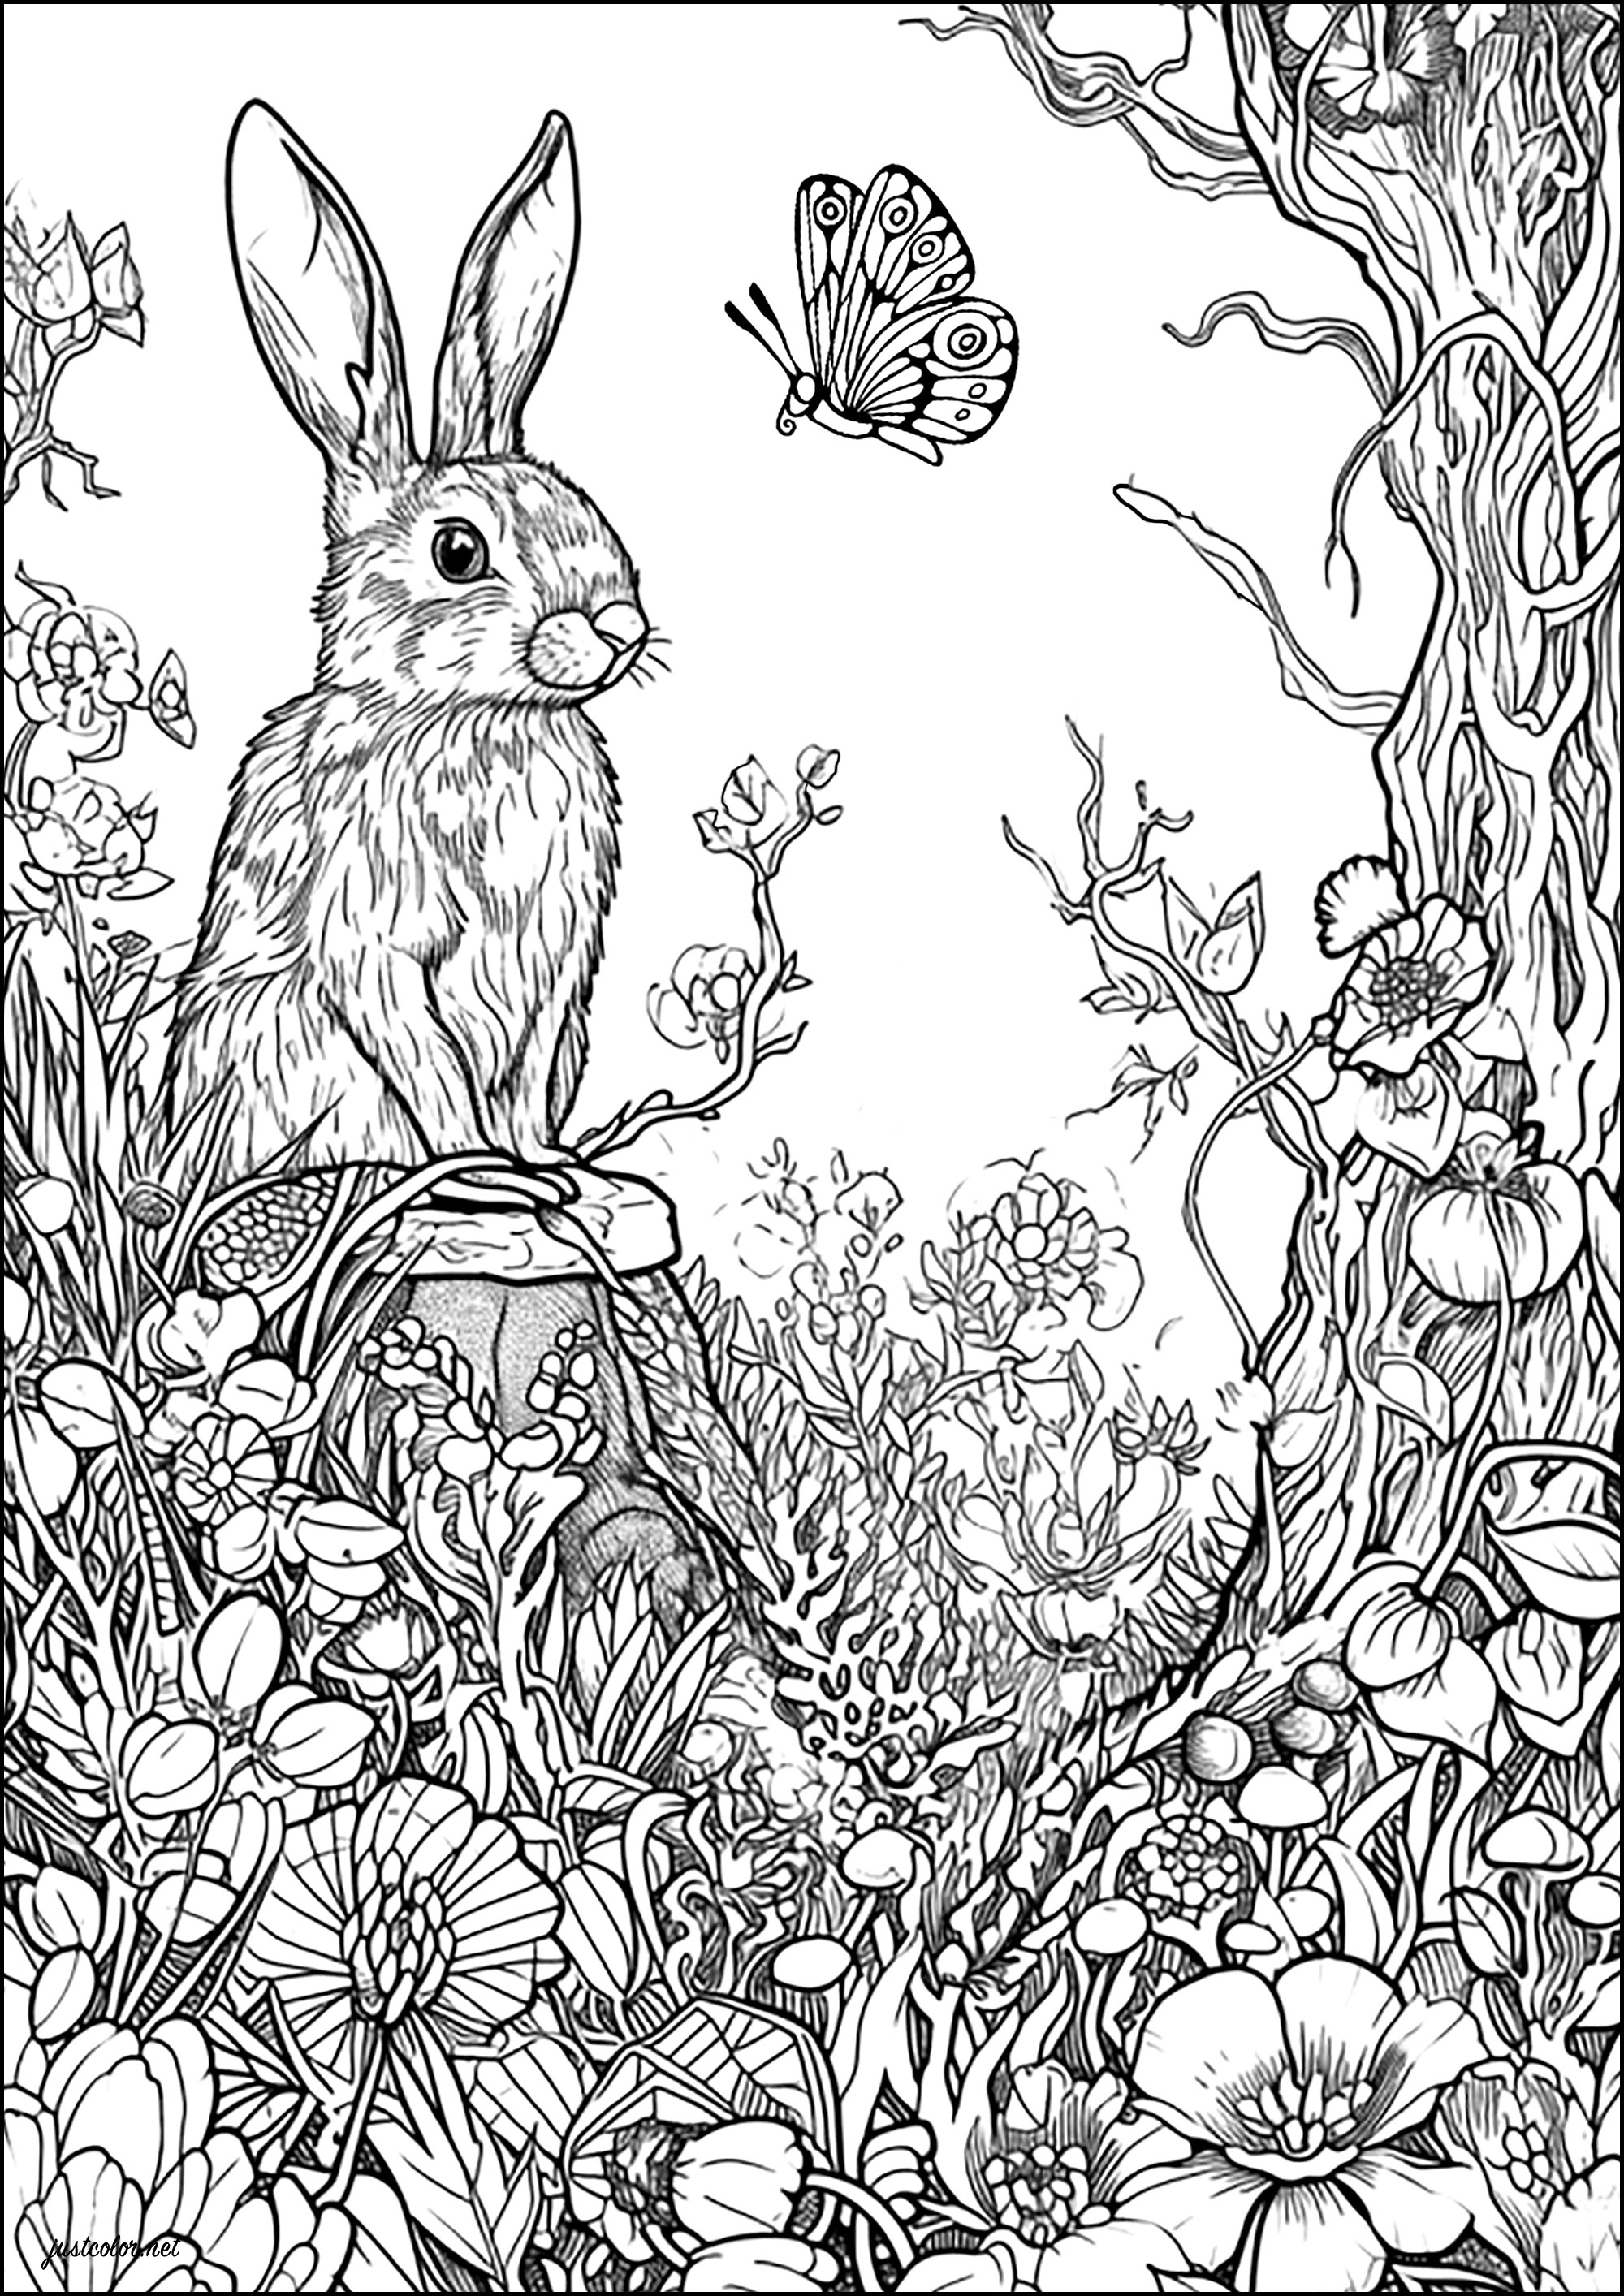 The rabbit and the butterfly. Color this beautiful rabbit and the butterfly with which it seems to be conversing, as well as the many flowers that surround them in this enchanted forest.